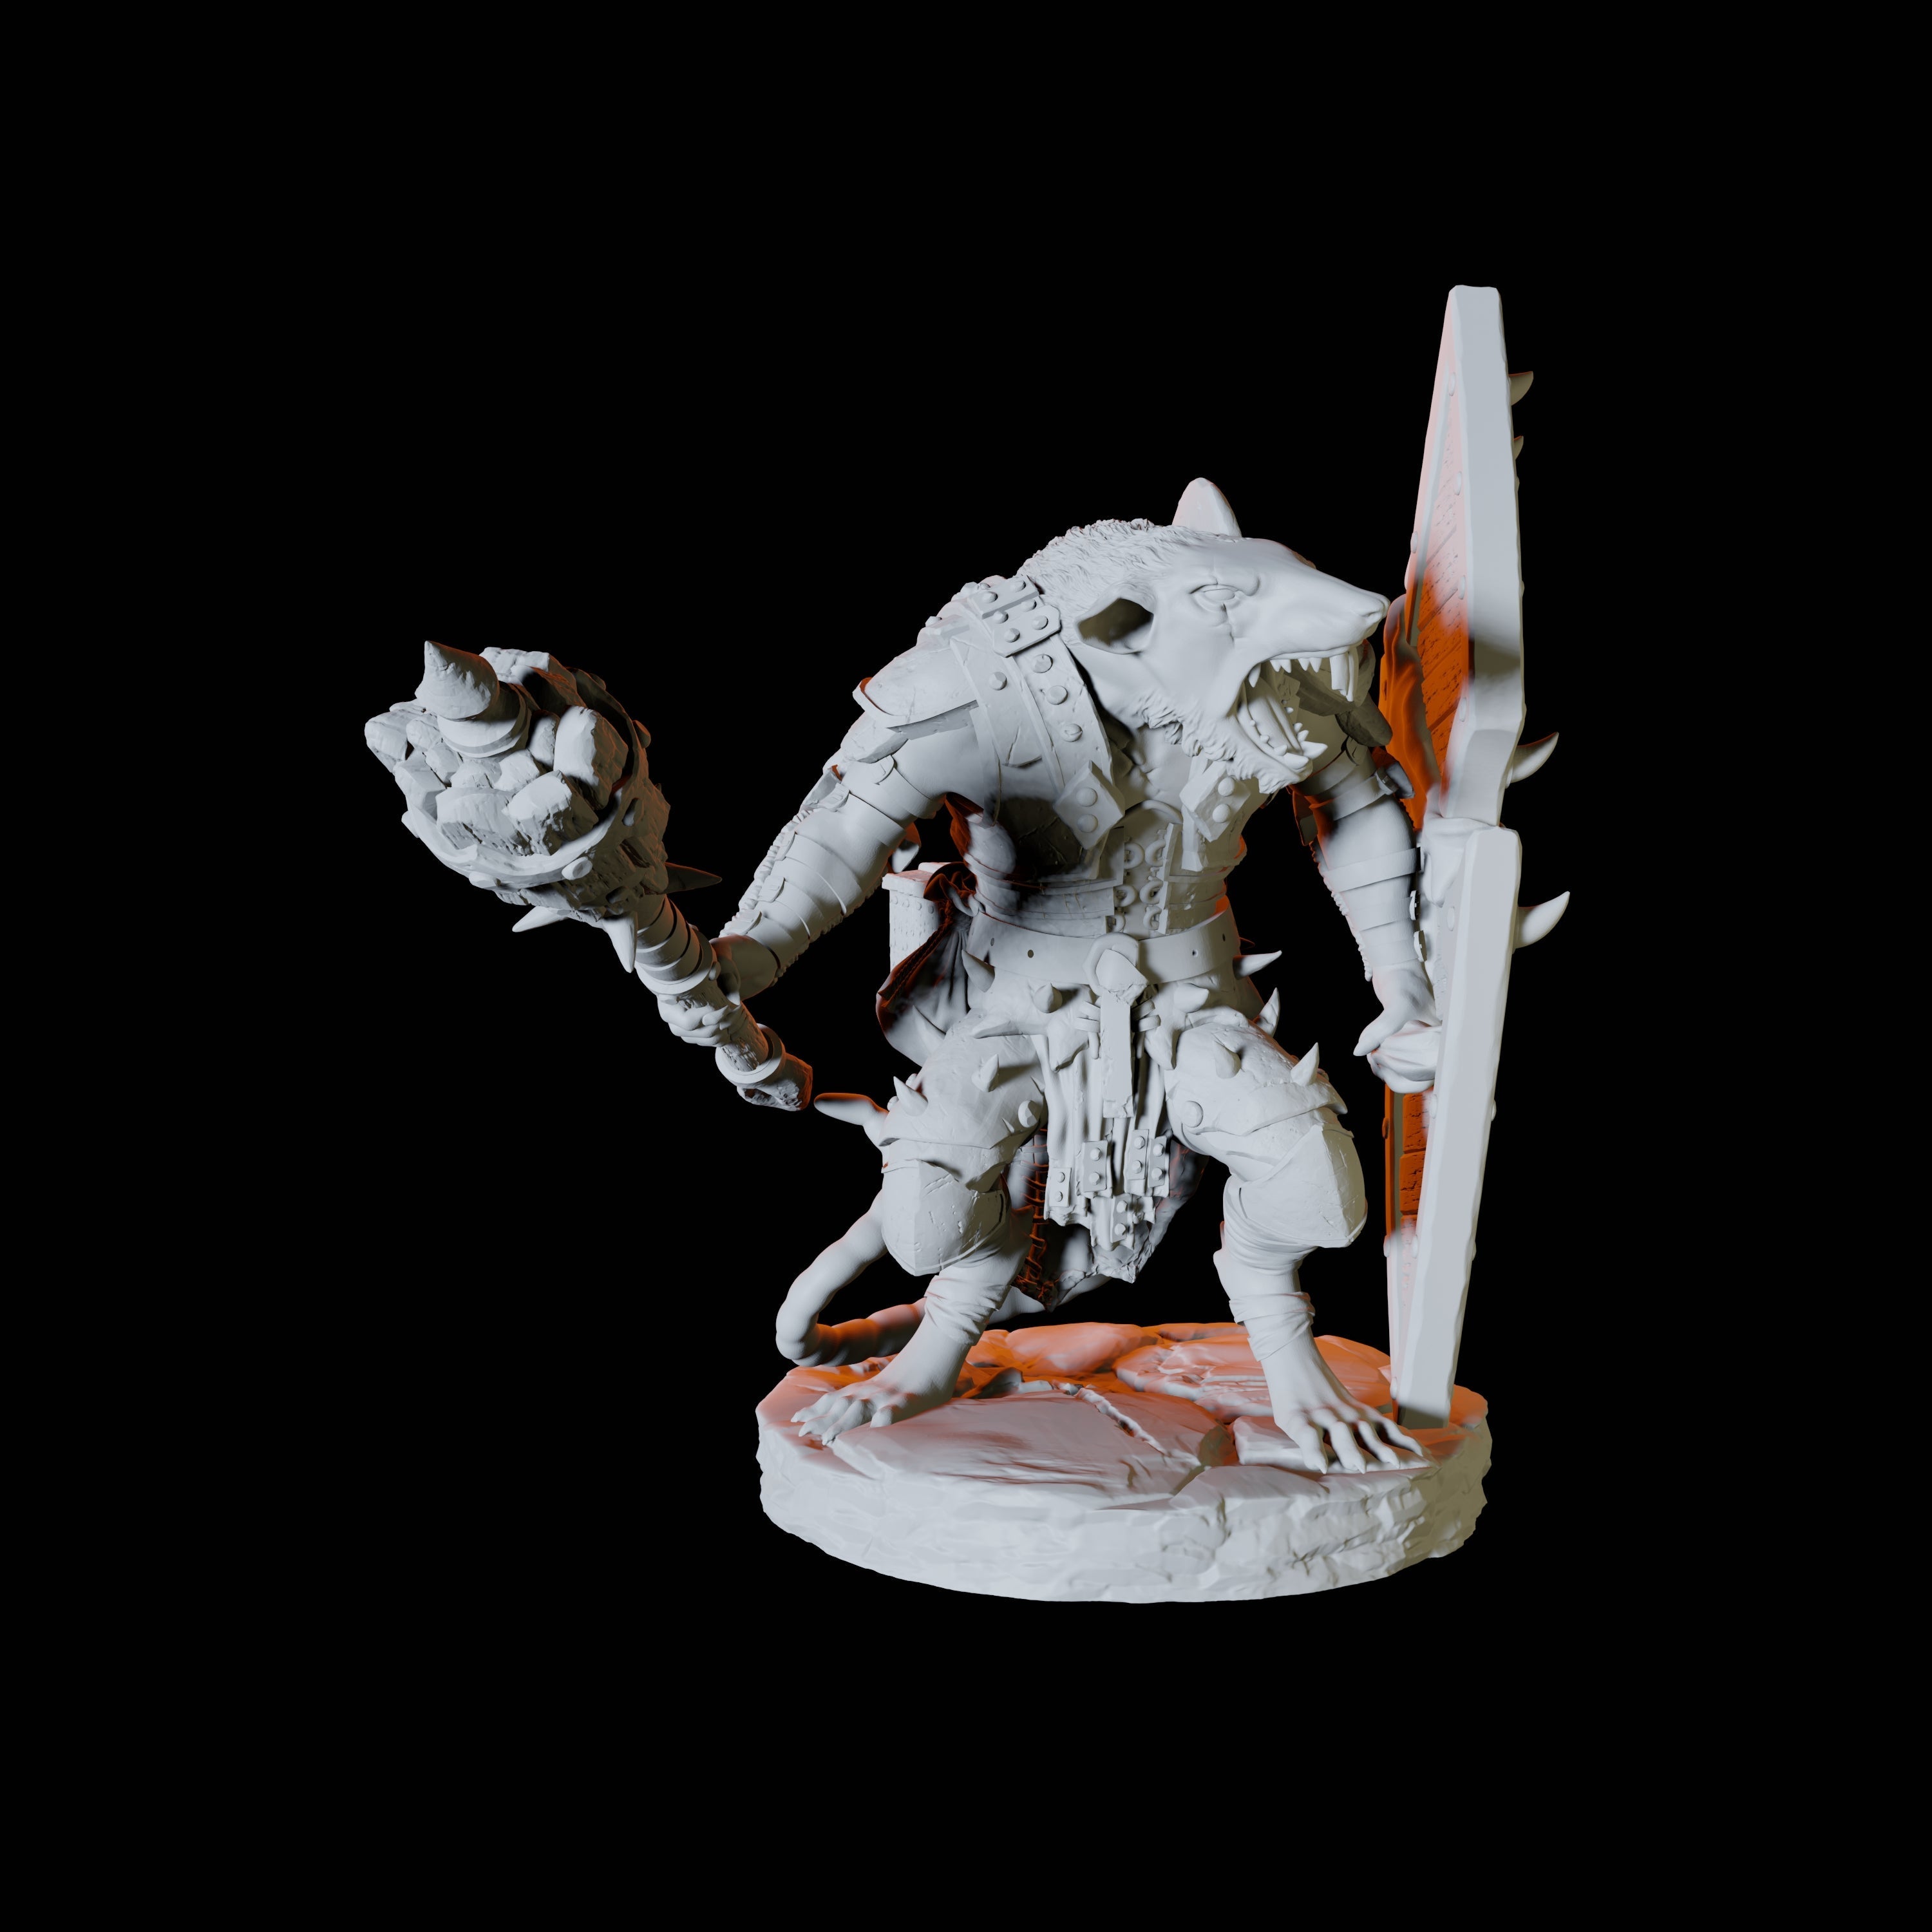 Ratfolk Scout C Miniature for Dungeons and Dragons, Pathfinder or other TTRPGs